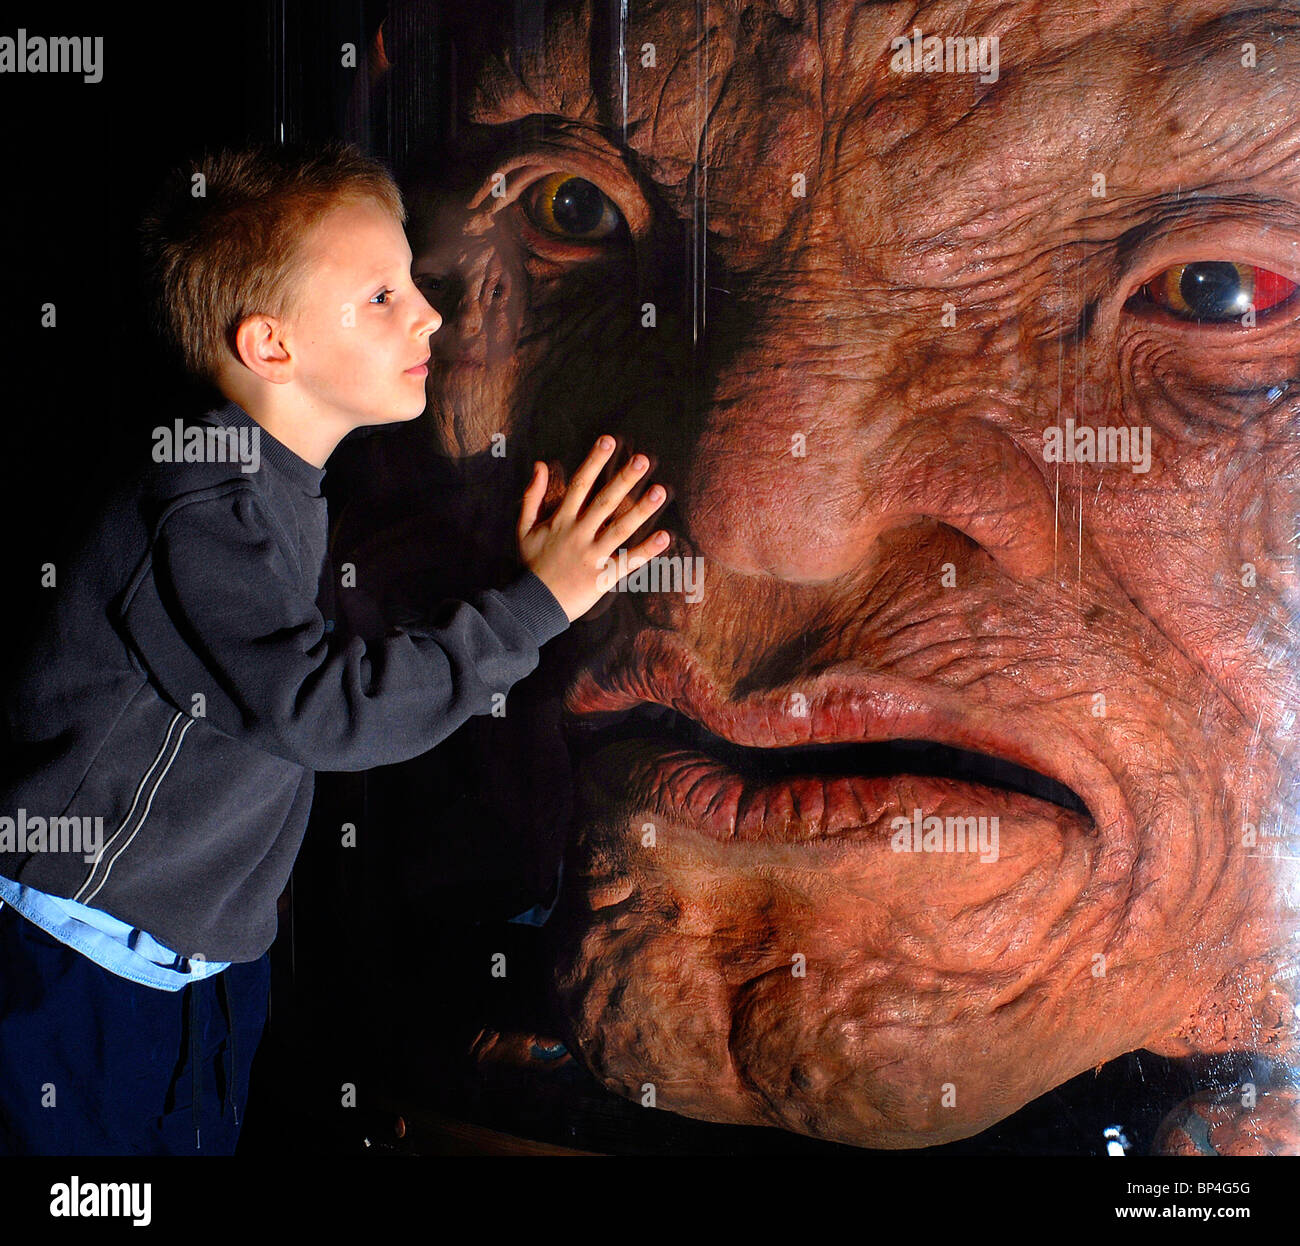 Stephen Hood,(9), meets the face of Boe-The oldest living being in the universe, at the Dr Who Up Close exhibition Stock Photo